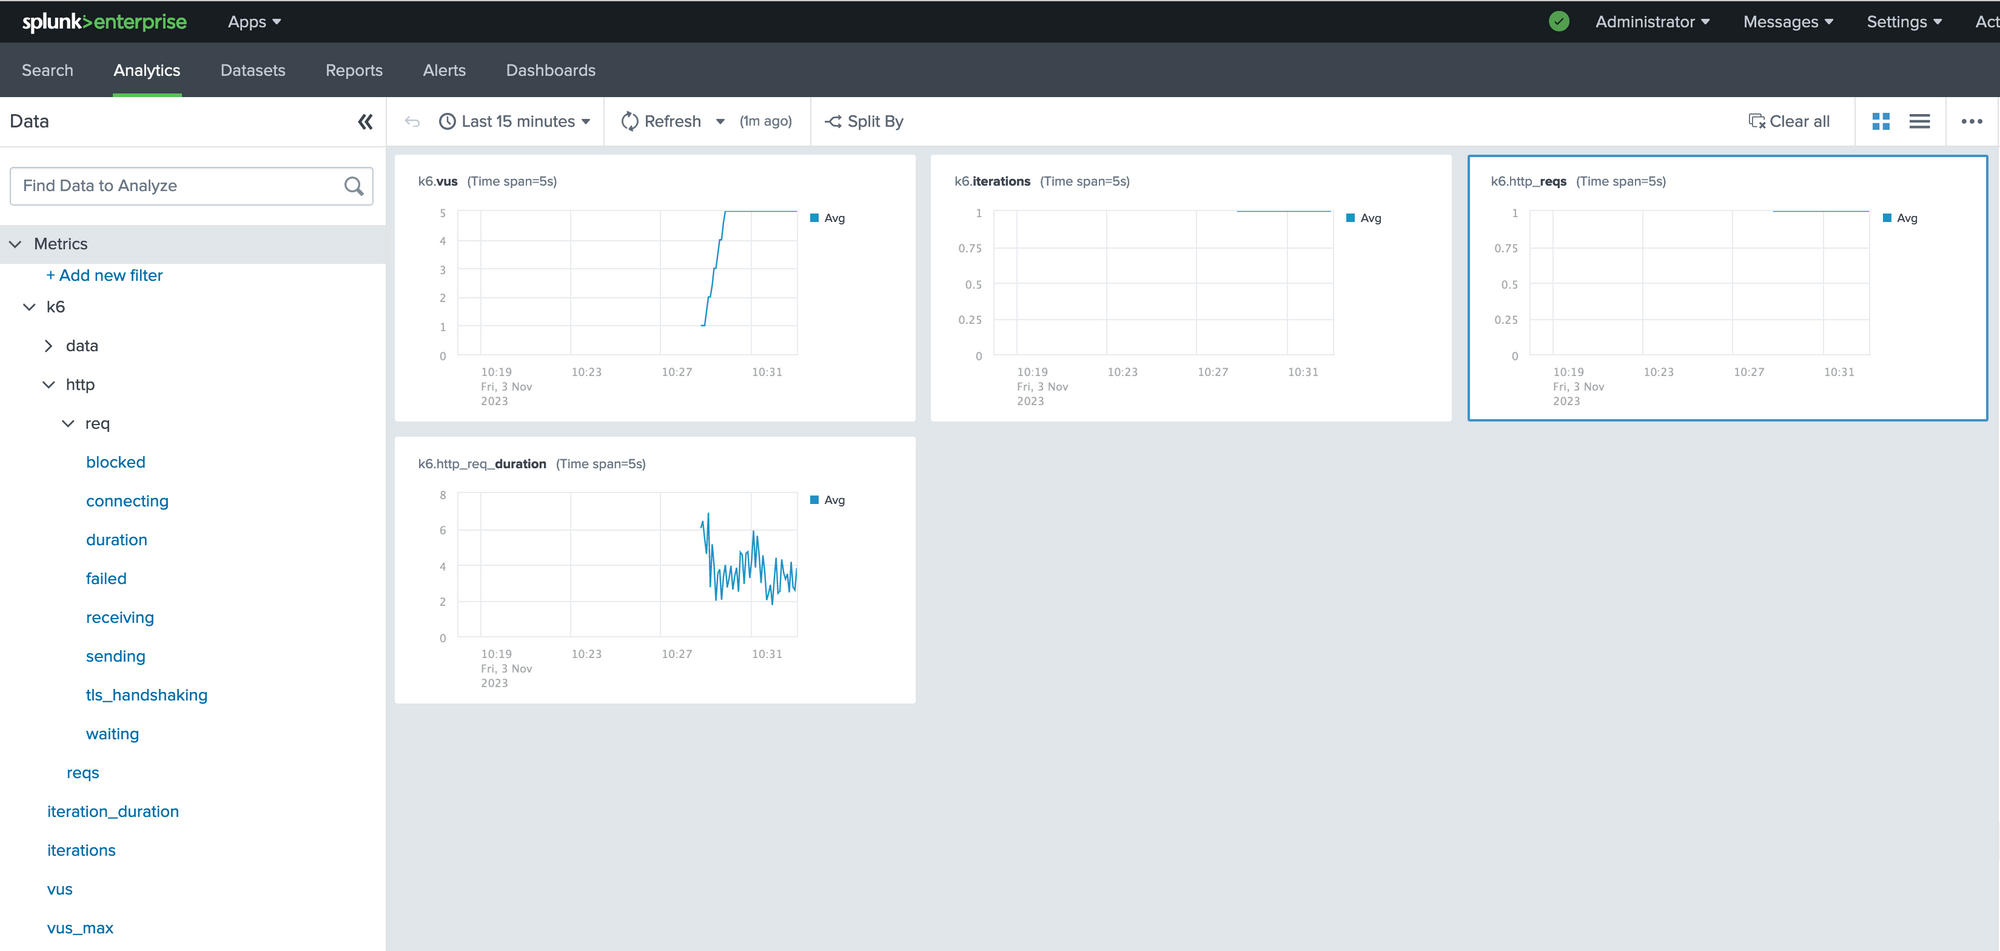 How to get your k6 performance test metrics into Splunk?